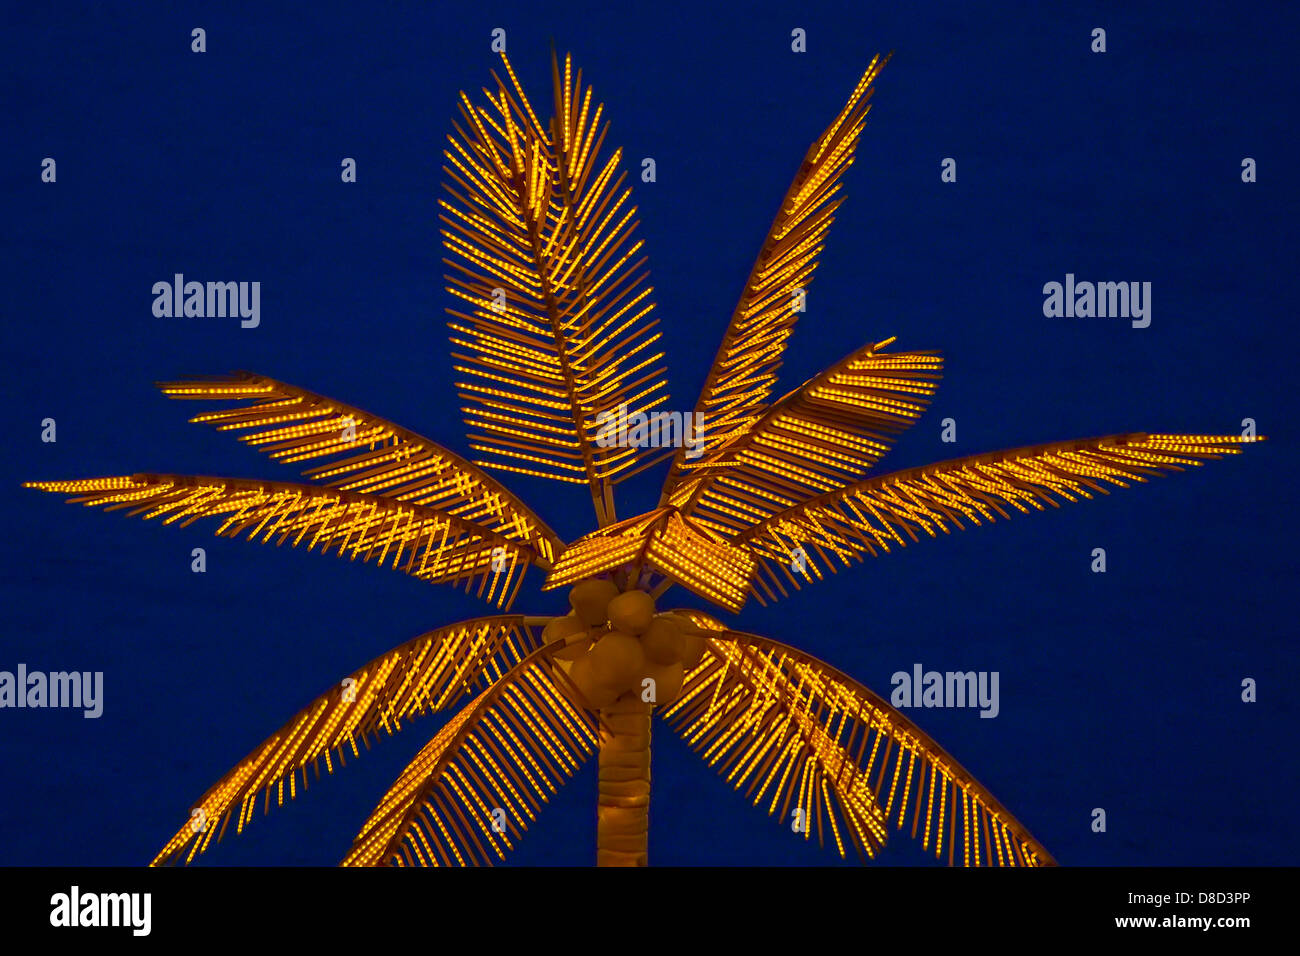 Palm tree made of lights lit up at night Stock Photo